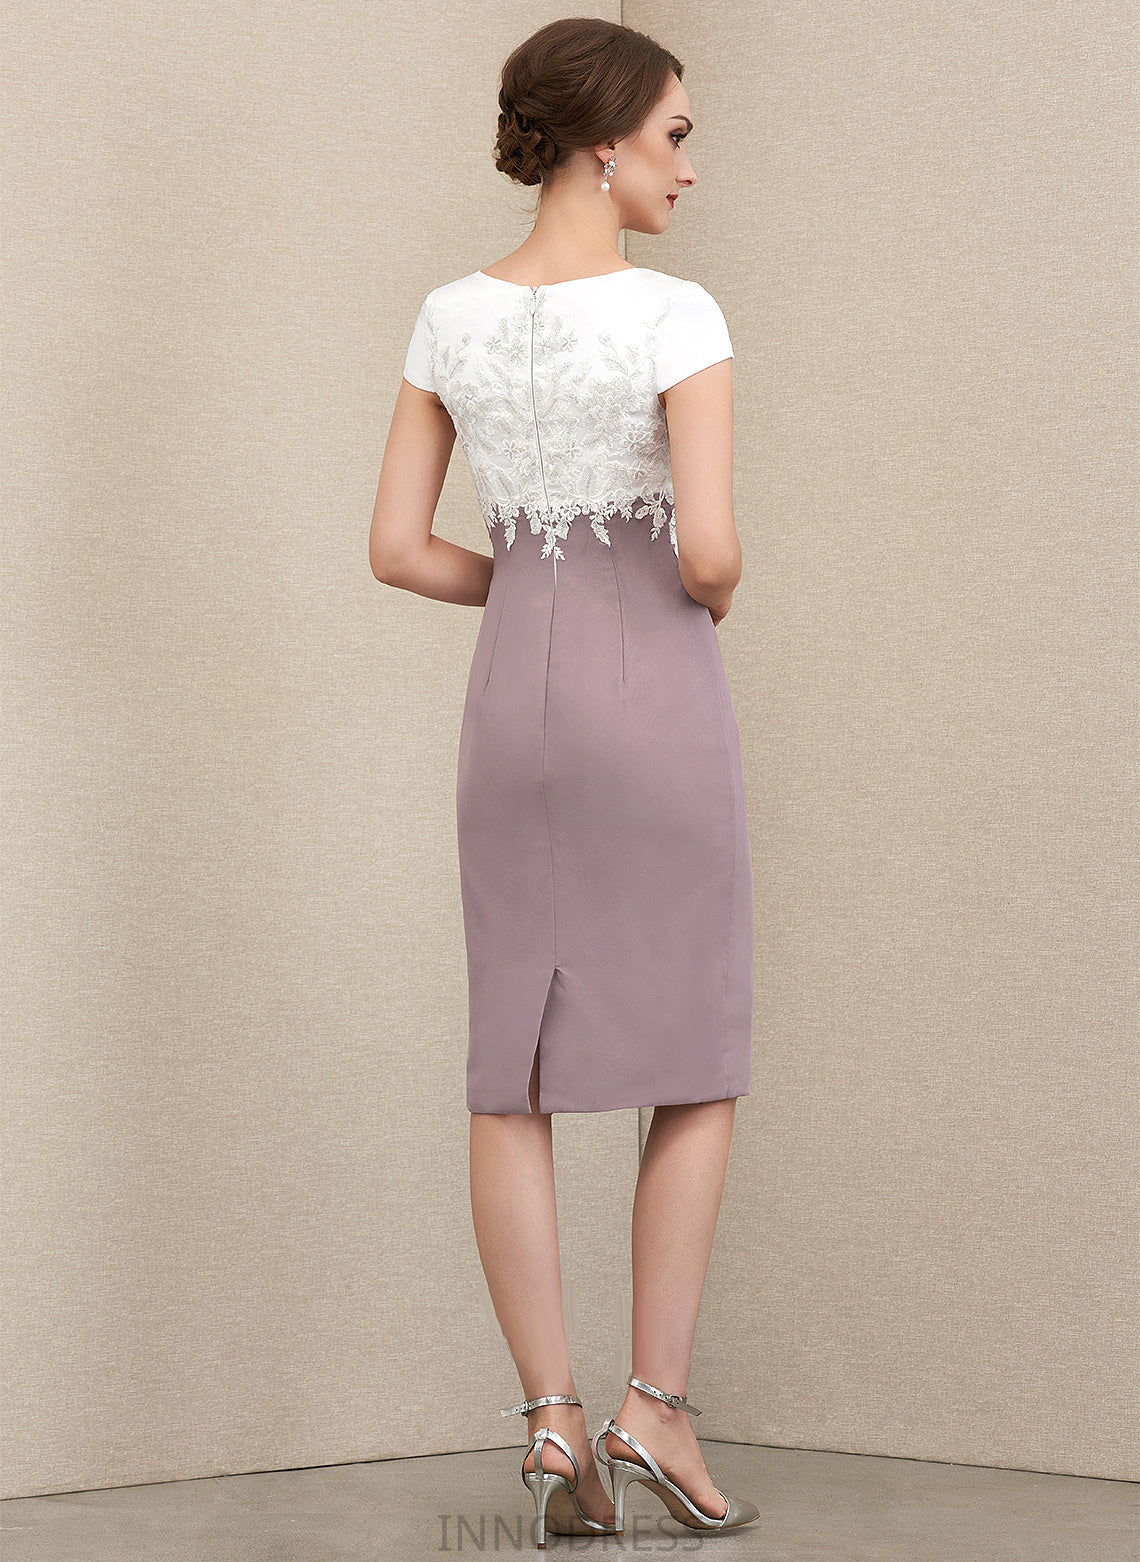 Chiffon Neck Elisa Scoop Knee-Length Lace the Mother of the Bride Dresses Bride of Sheath/Column Dress Mother